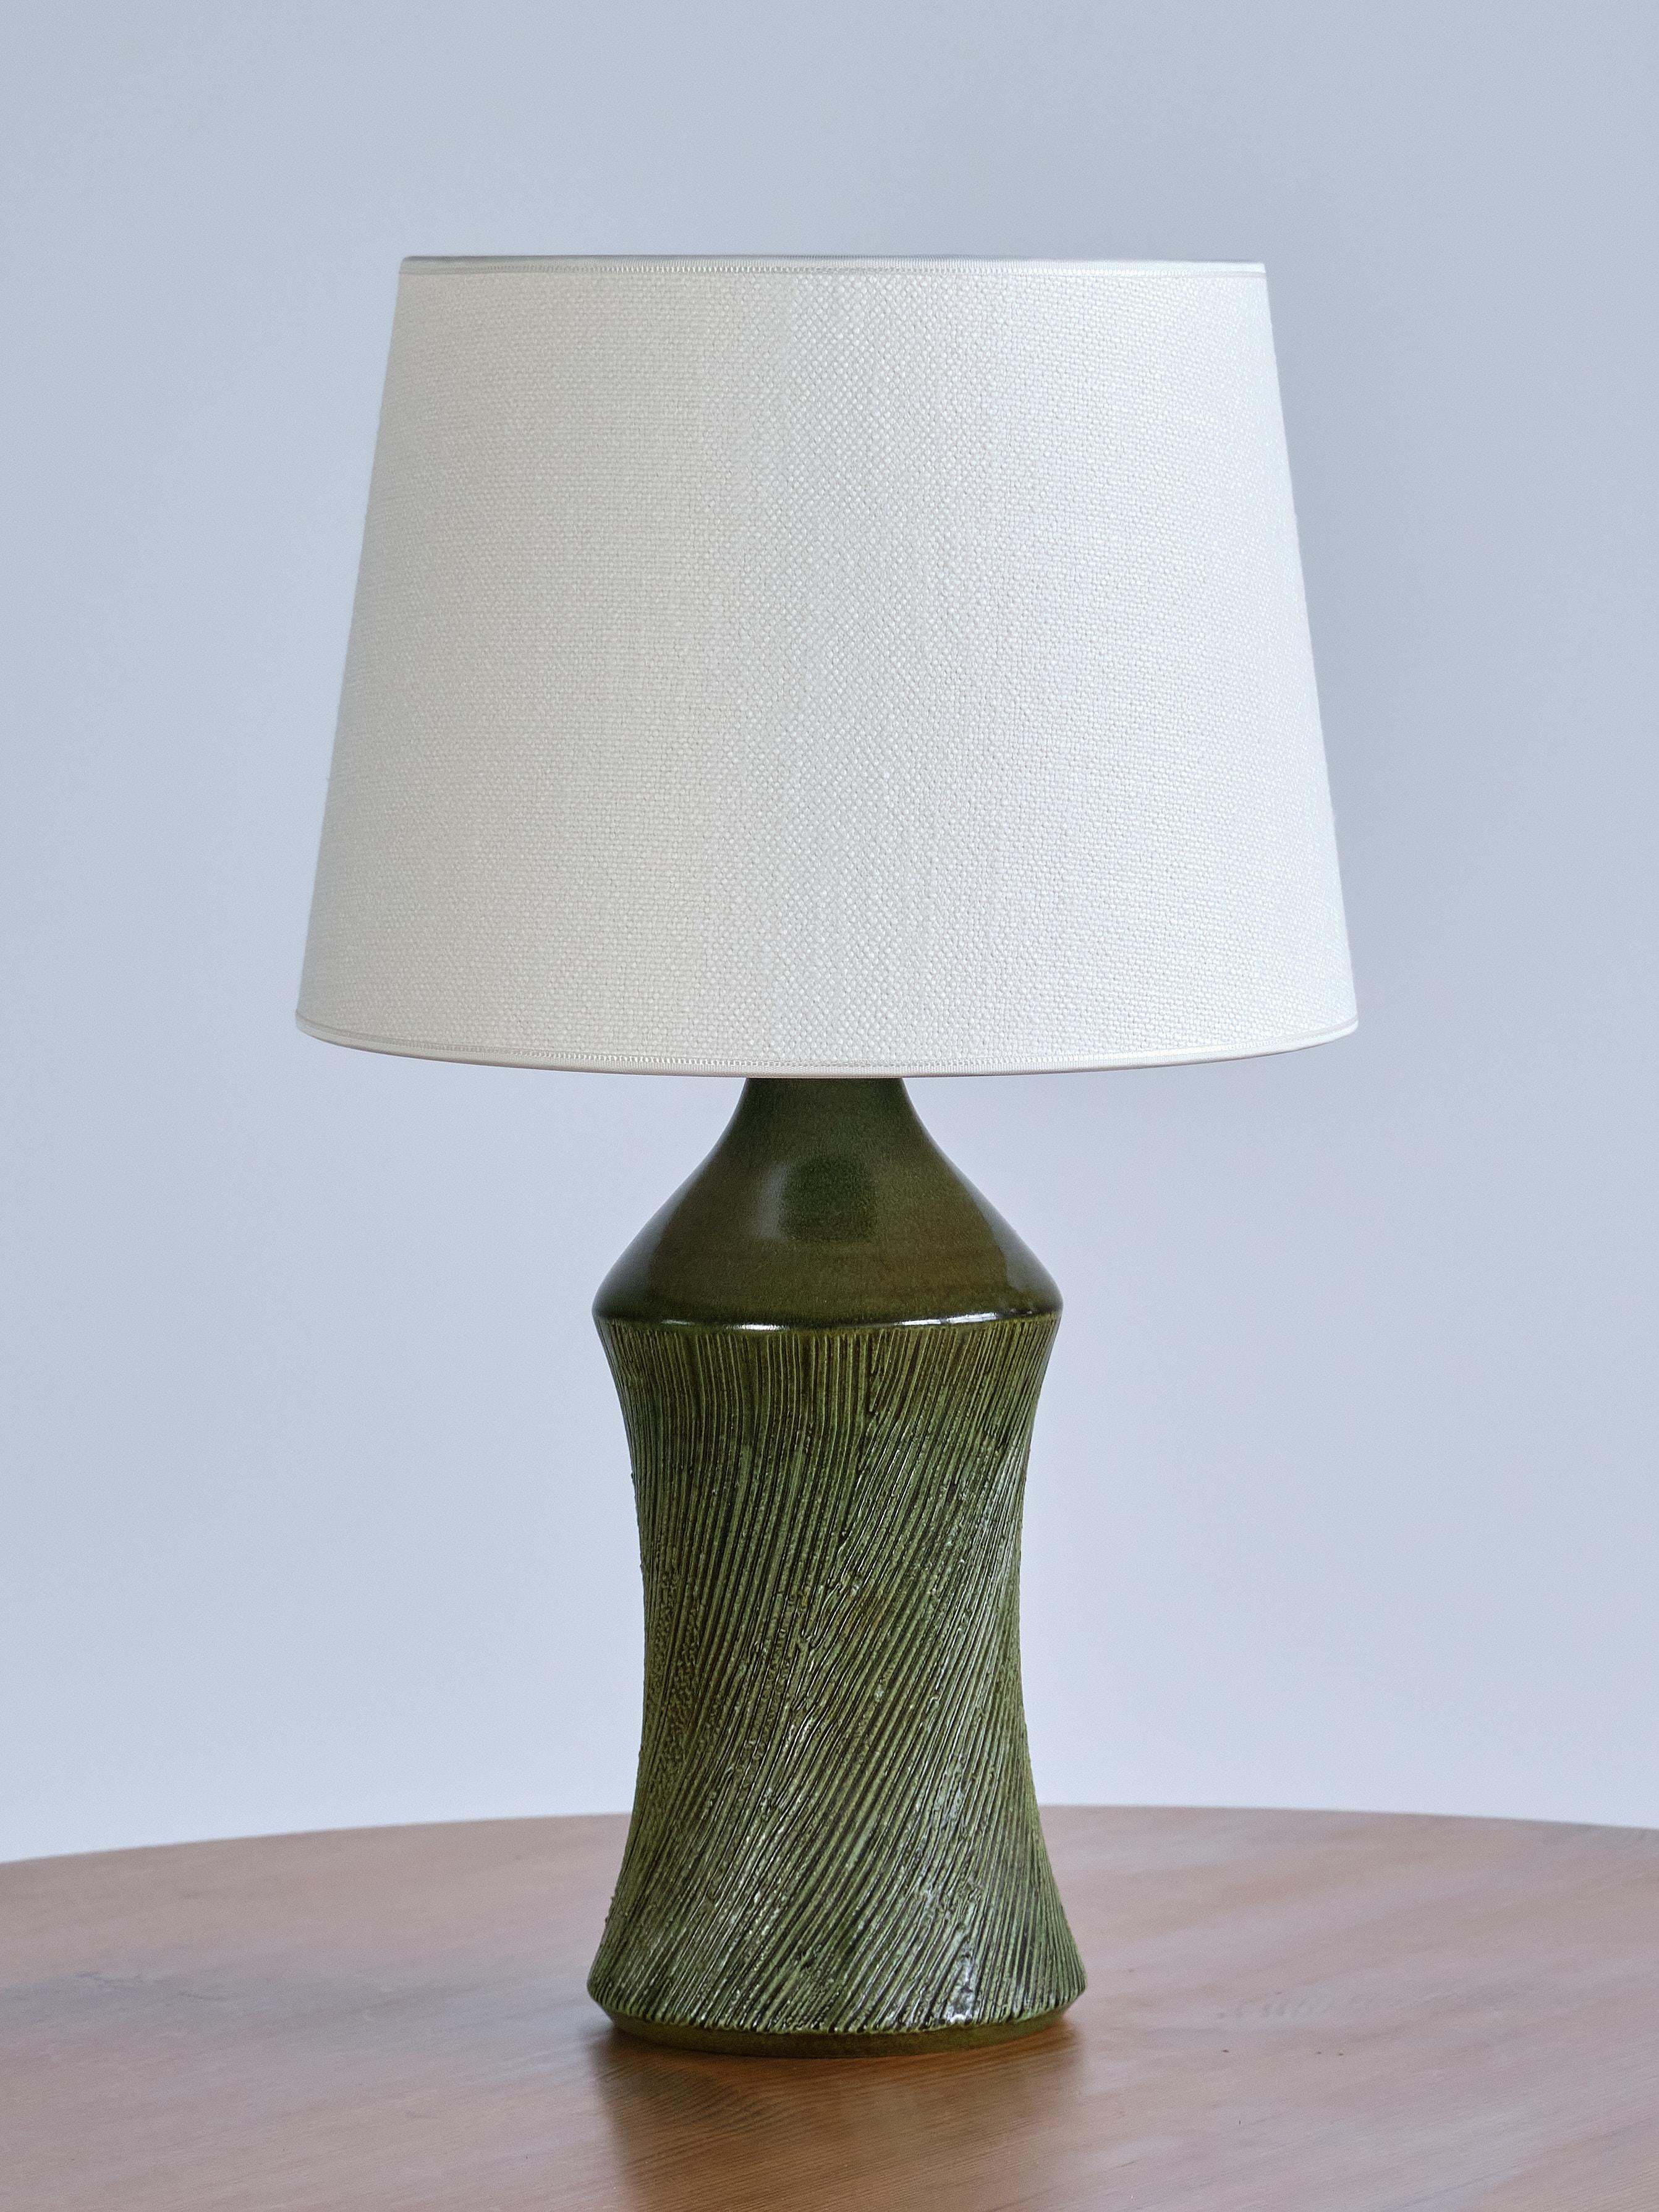 This striking stoneware table lamp was designed by Henry Brandi, and produced by his own firm, Brandi Vejbystrand, Sweden, 1960s. Signed 'Brandi' and labeled underneath.

The base is executed in glazed stoneware in a beautiful shade of forest green.